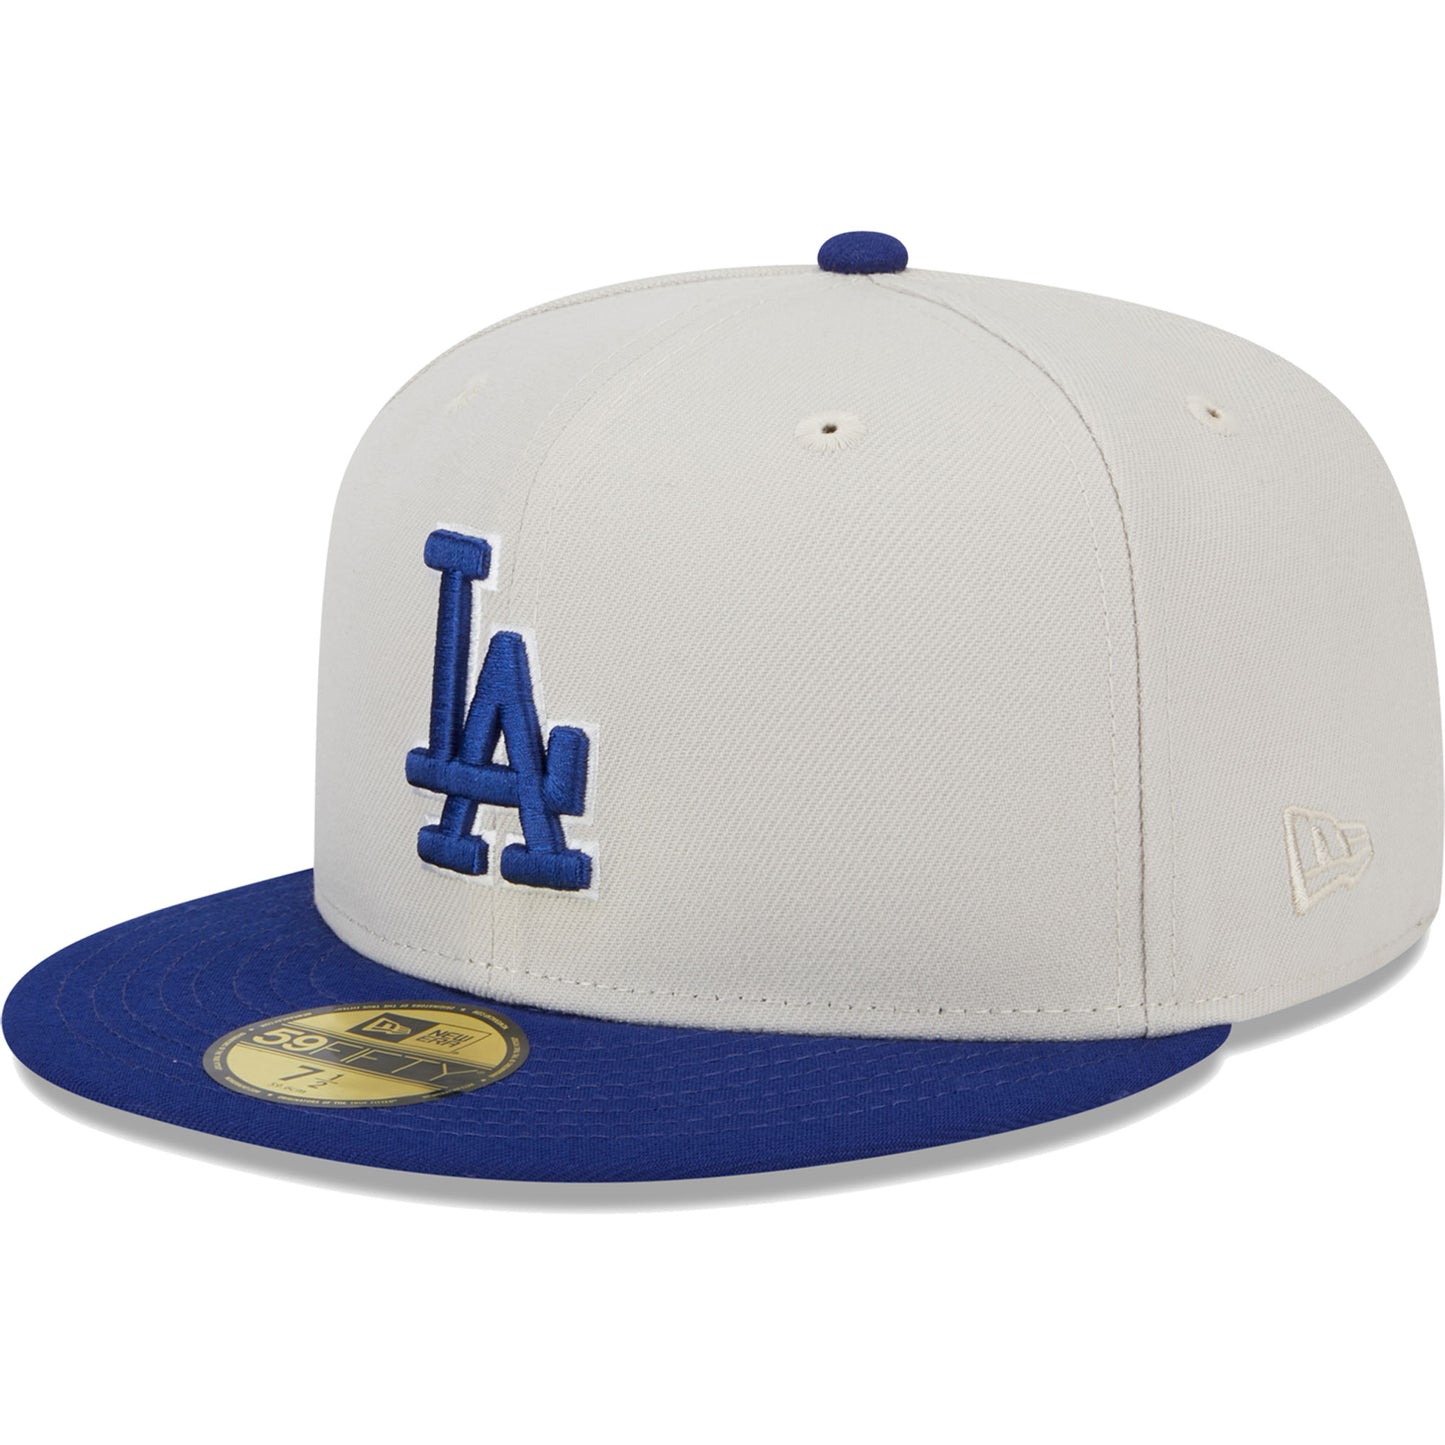 Los Angeles Dodgers New Era World Class Back Patch 59FIFTY Fitted Hat - Gray/Royal